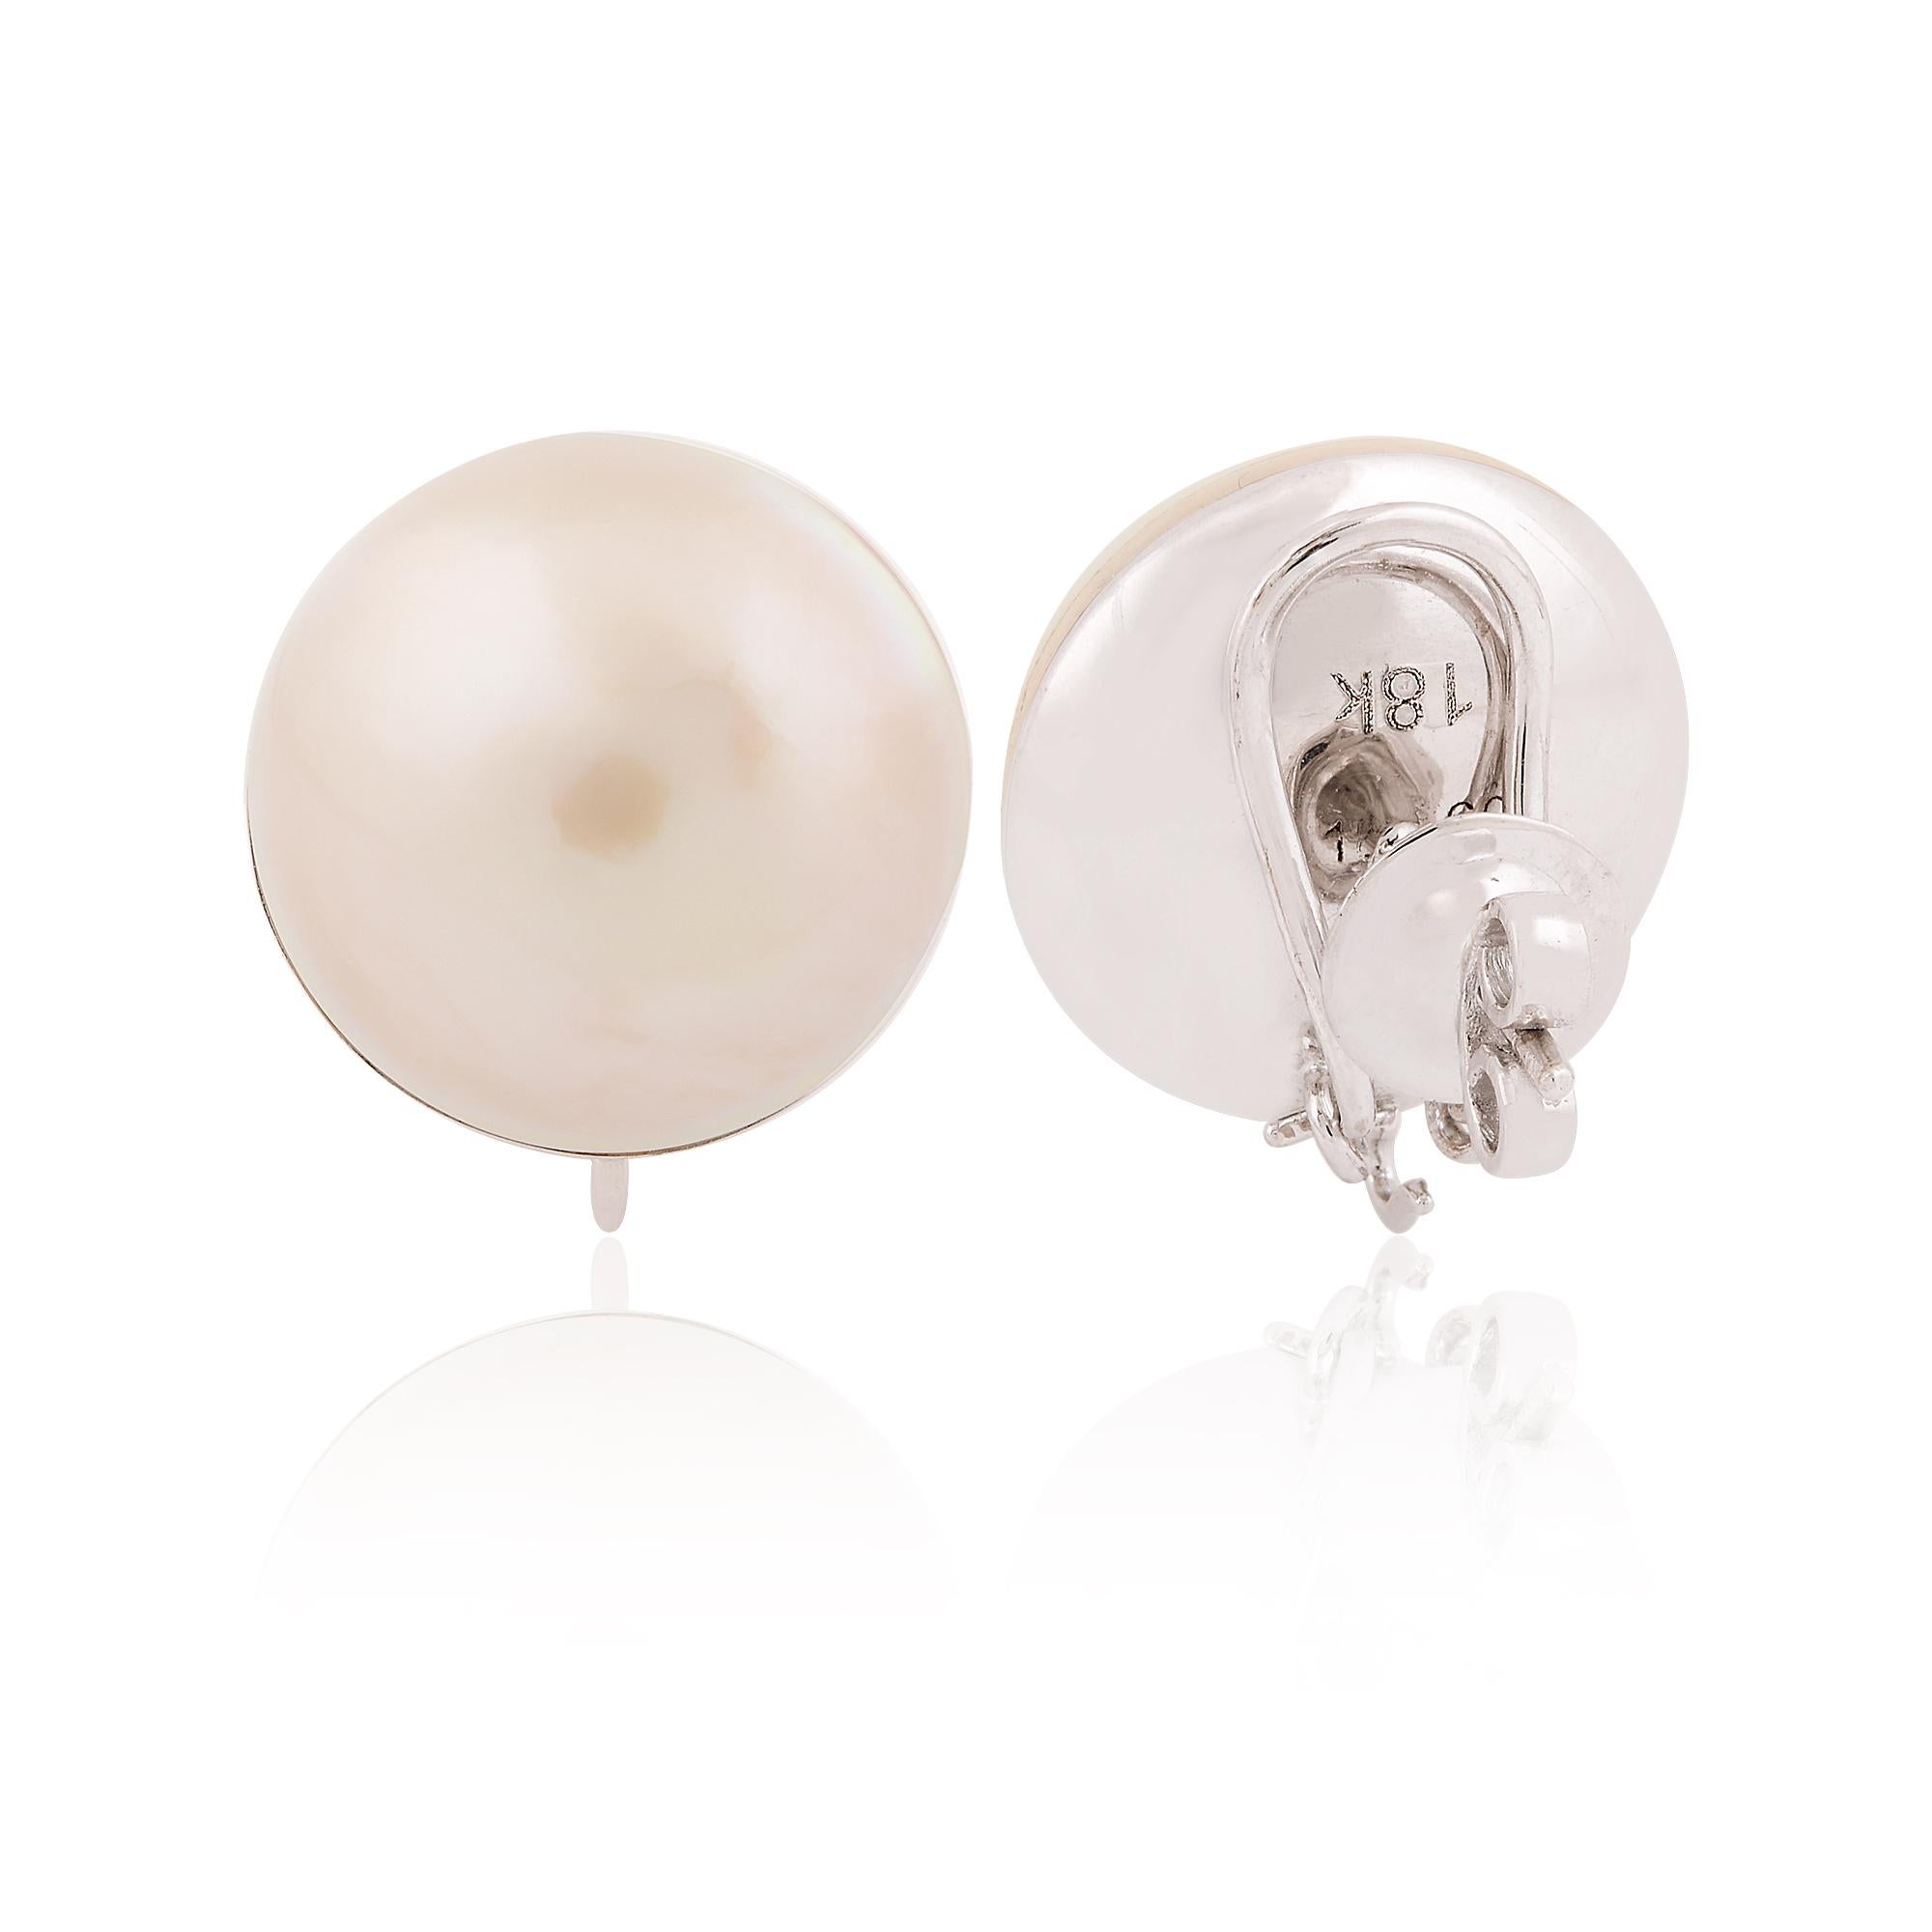 Item Code:- SEE-11746
Gross Weight :- 9.10 gm Approx.
Solid 14k White Gold Weight :- 4.40 gm Approx.
Natural Pearl Weight :- 23.46 ct. Approx.
Earring Size : 17 mm Approx.

✦ Sizing
.....................
We can adjust most items to fit your sizing